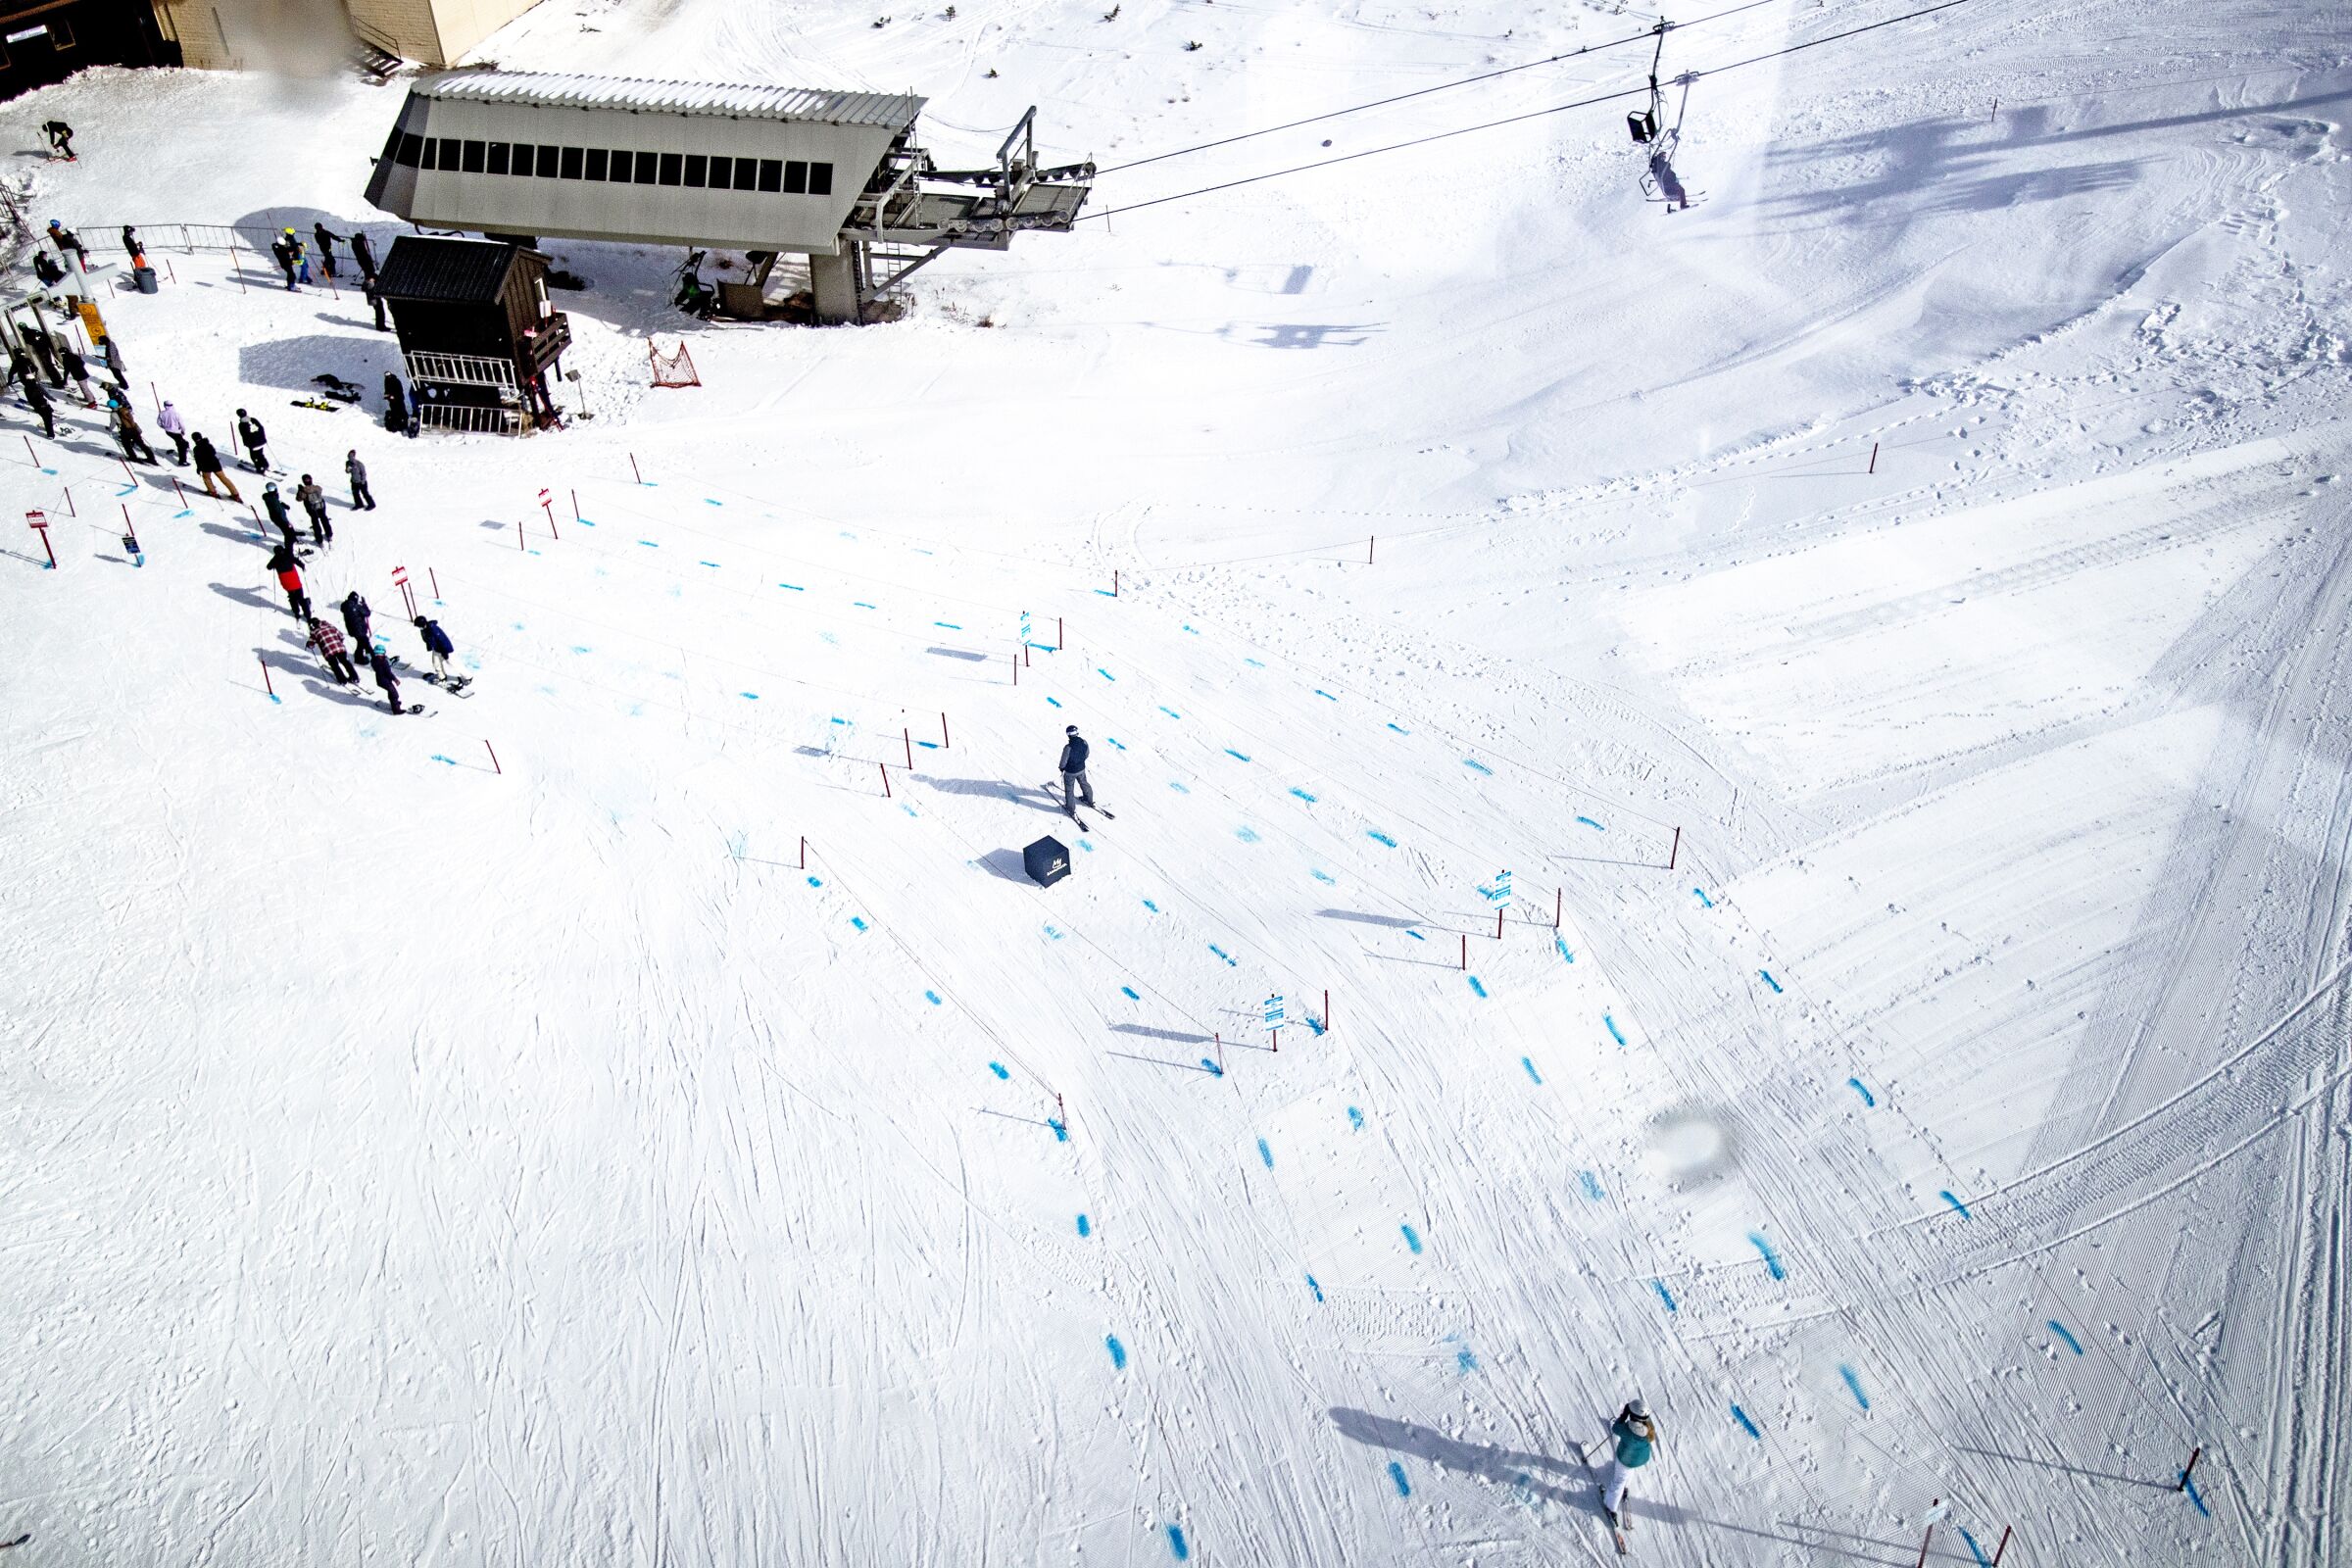 Blue dye in the snow at Mammoth Mountain marks physical distancing.